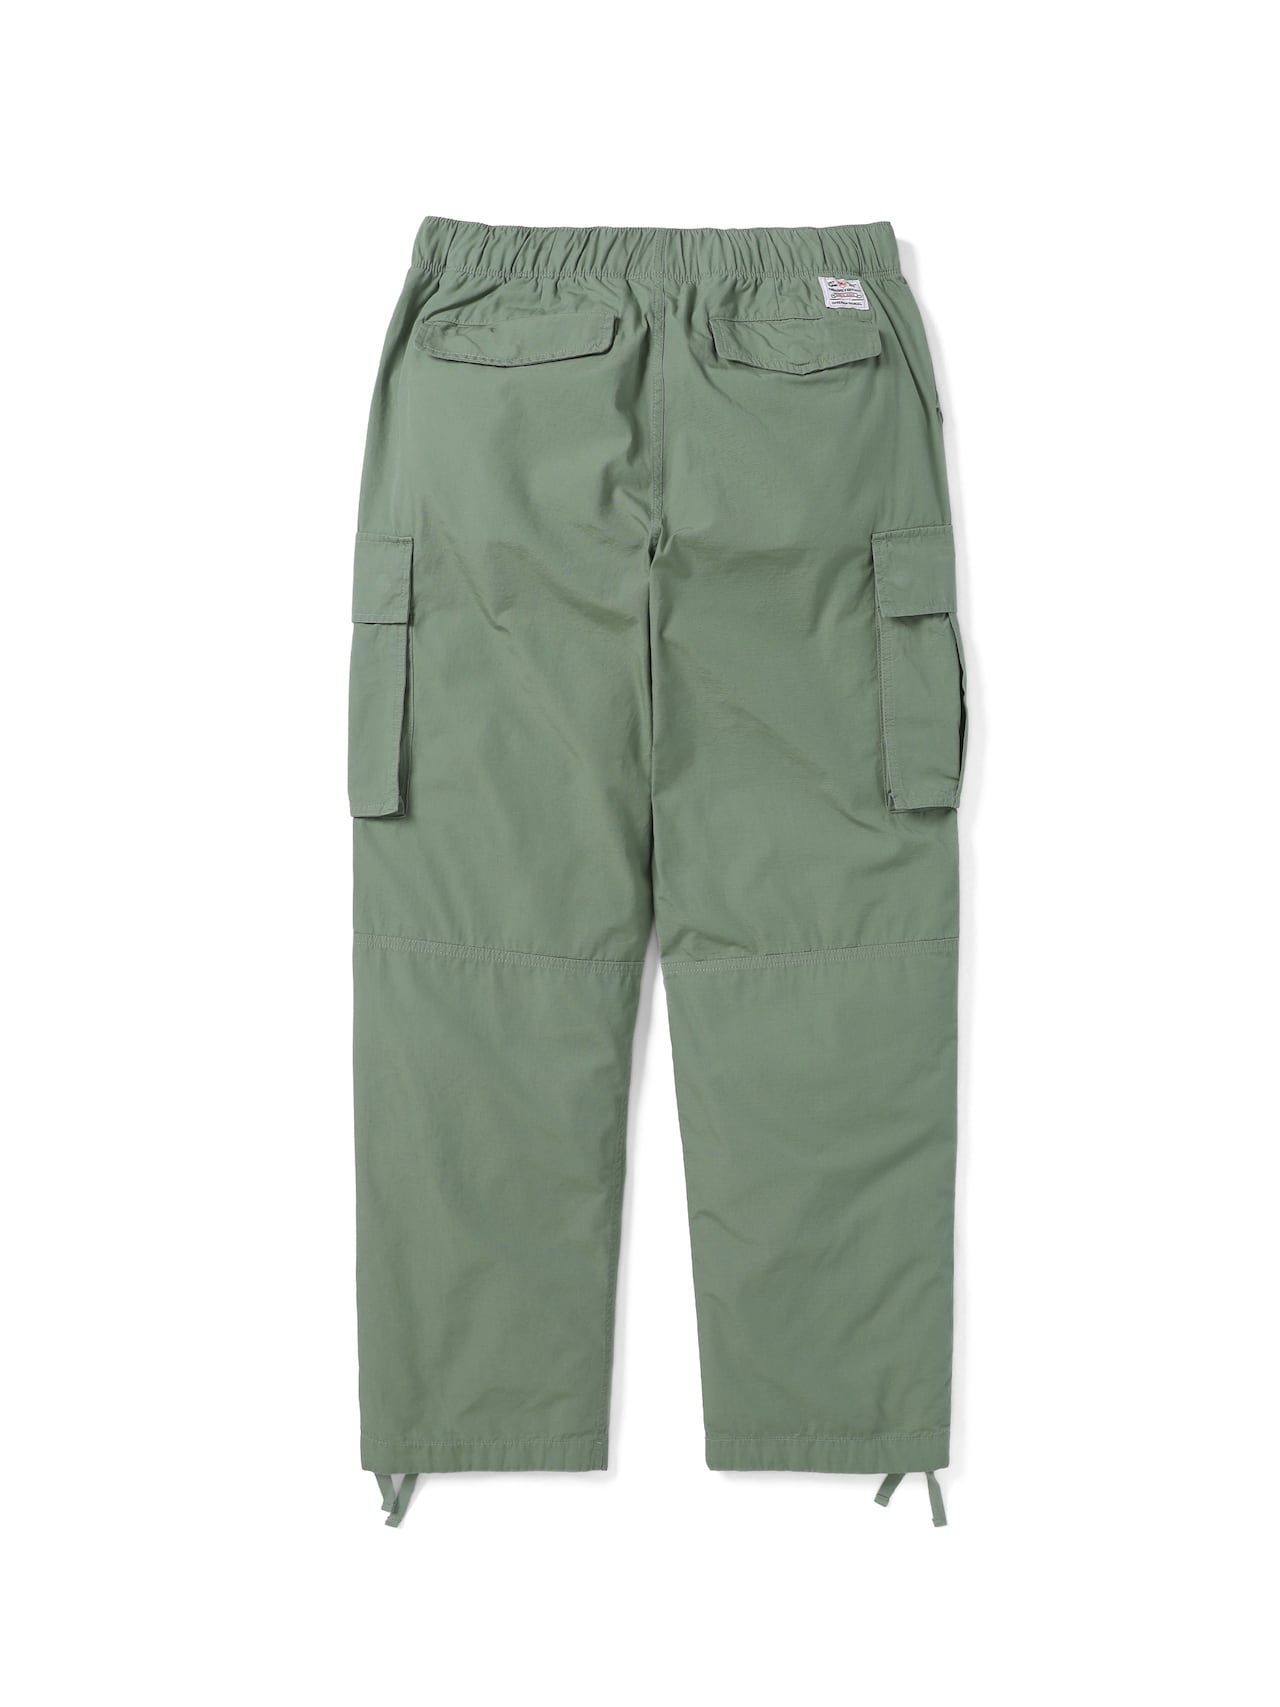 THIS IS NEVER THAT CARGO PANT-Sage